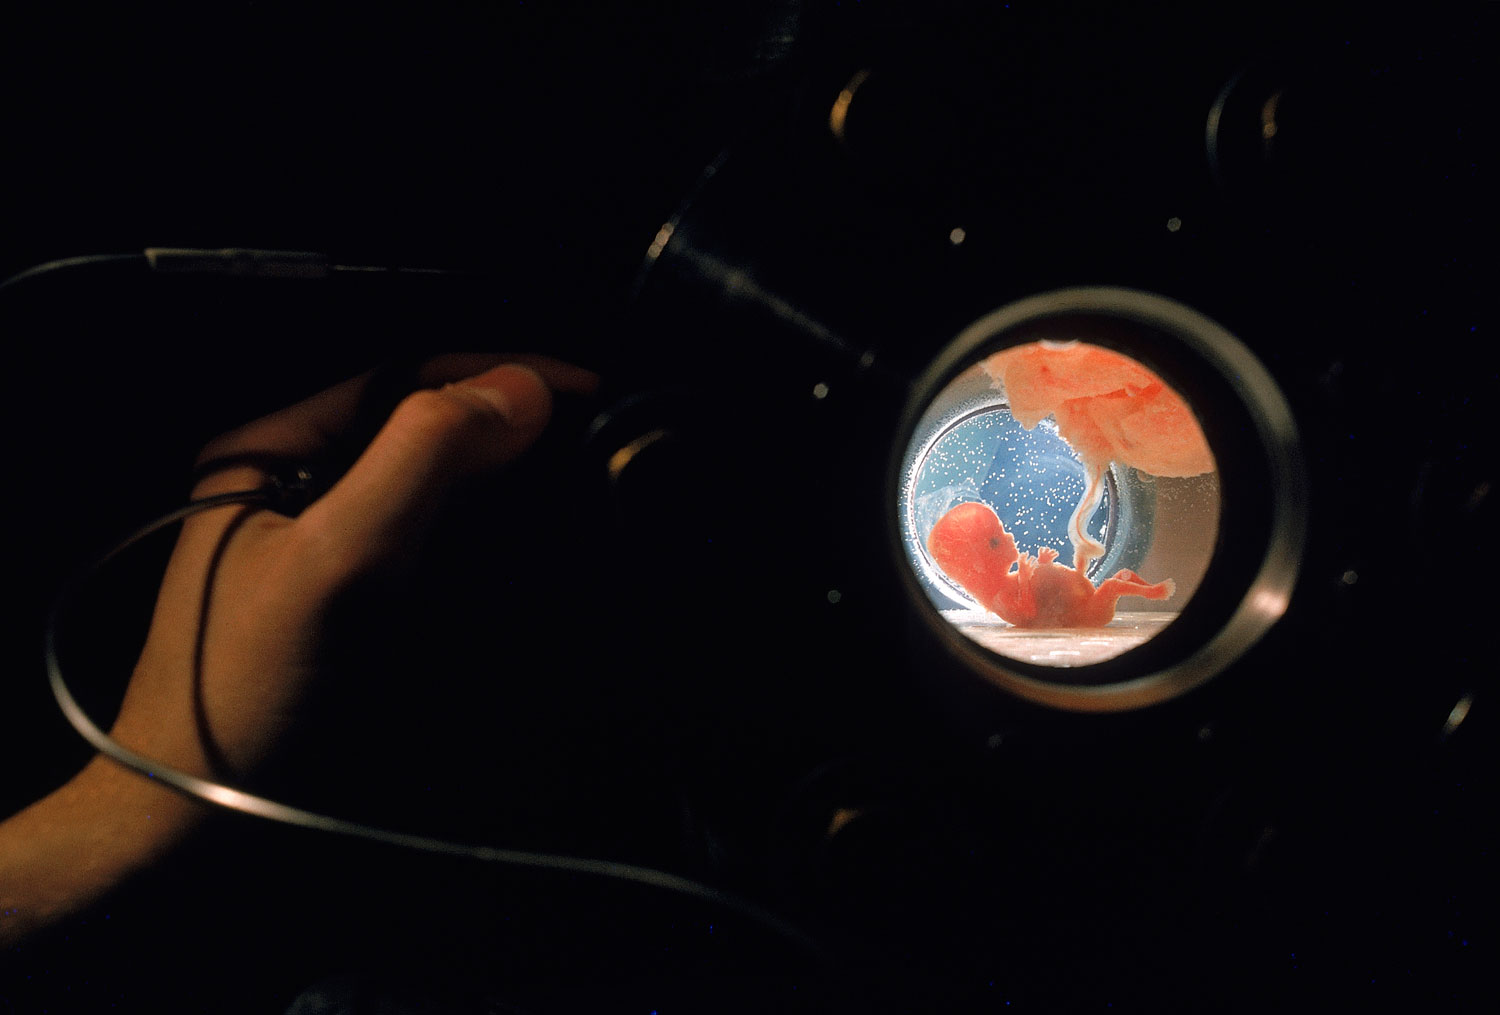 Seen through porthole, a fetus, attached by umbilical cord to placenta floating above it, gets oxygen through skin from surrounding fluid. Hand at left is adjusting valve to let in nutrients.